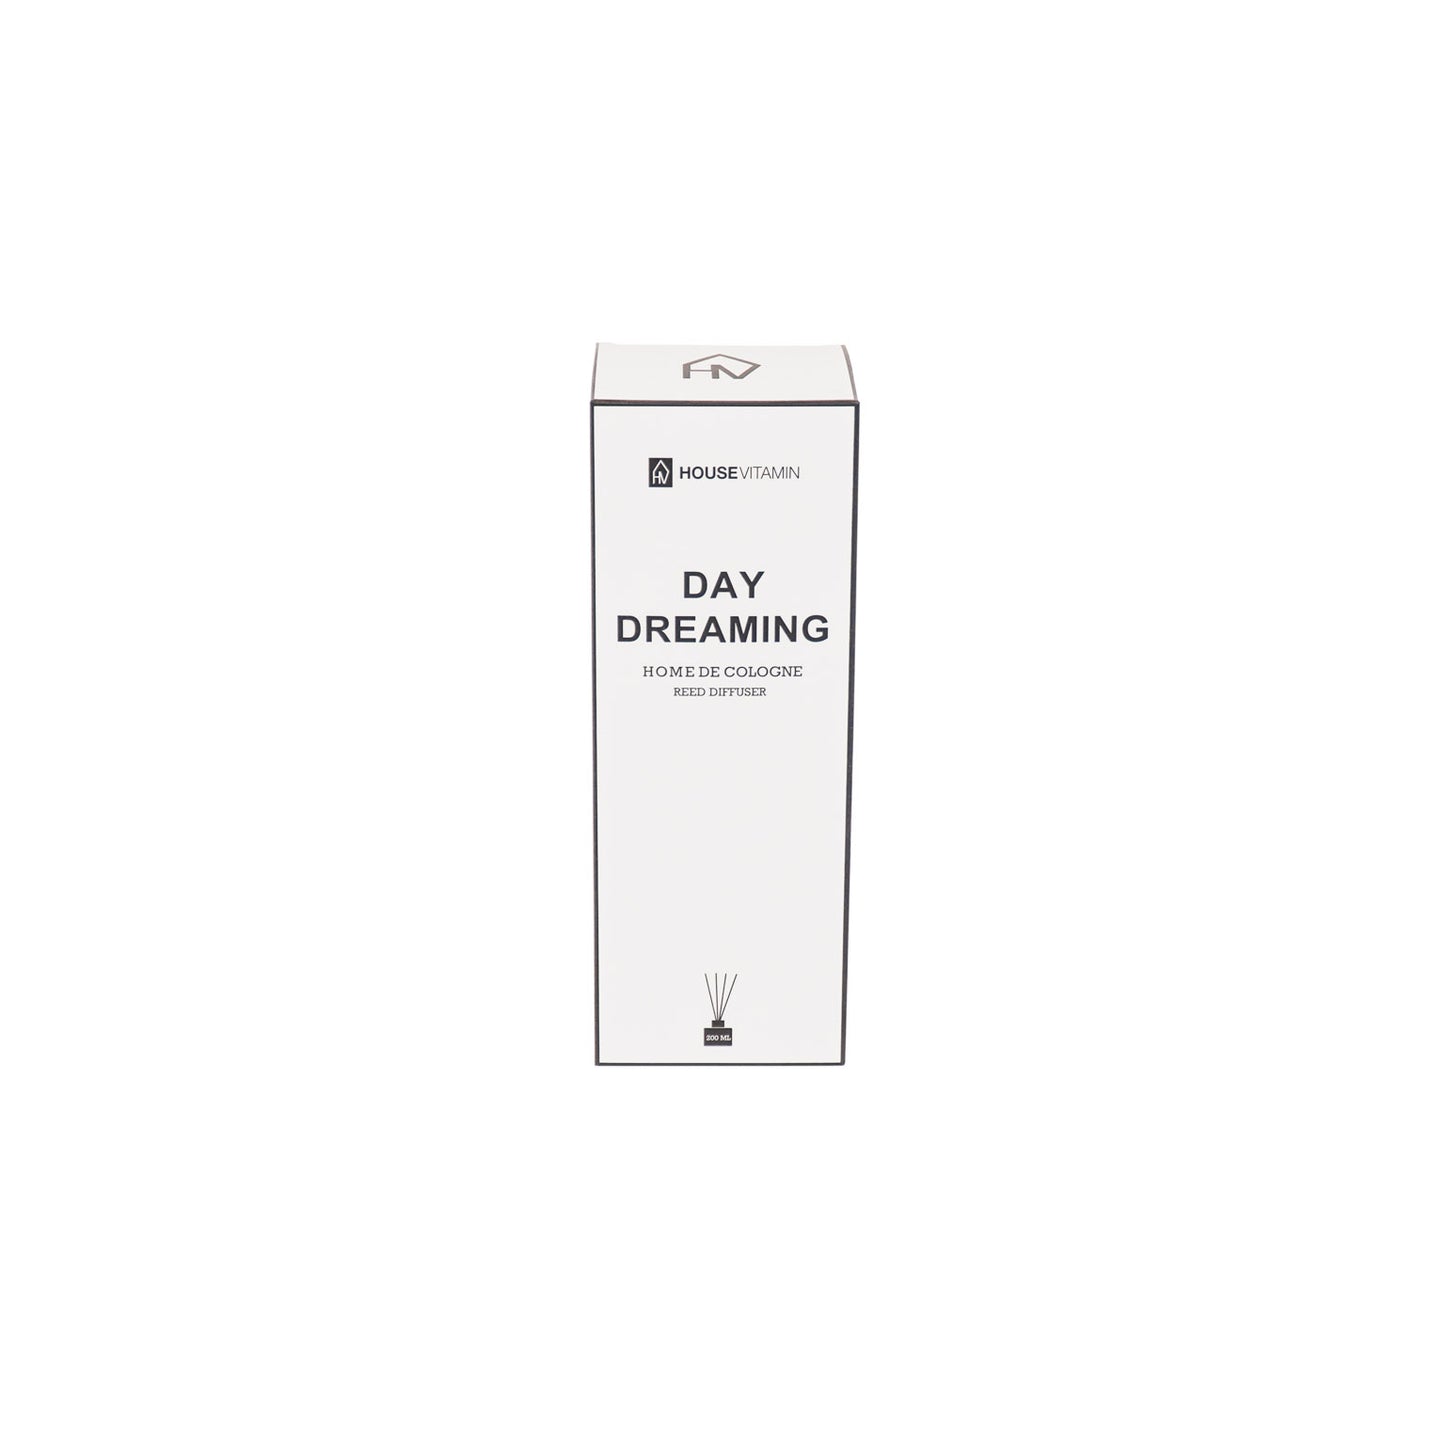 HV Home de Cologne Reed Diffusers - 200 ml - Day Dreaming